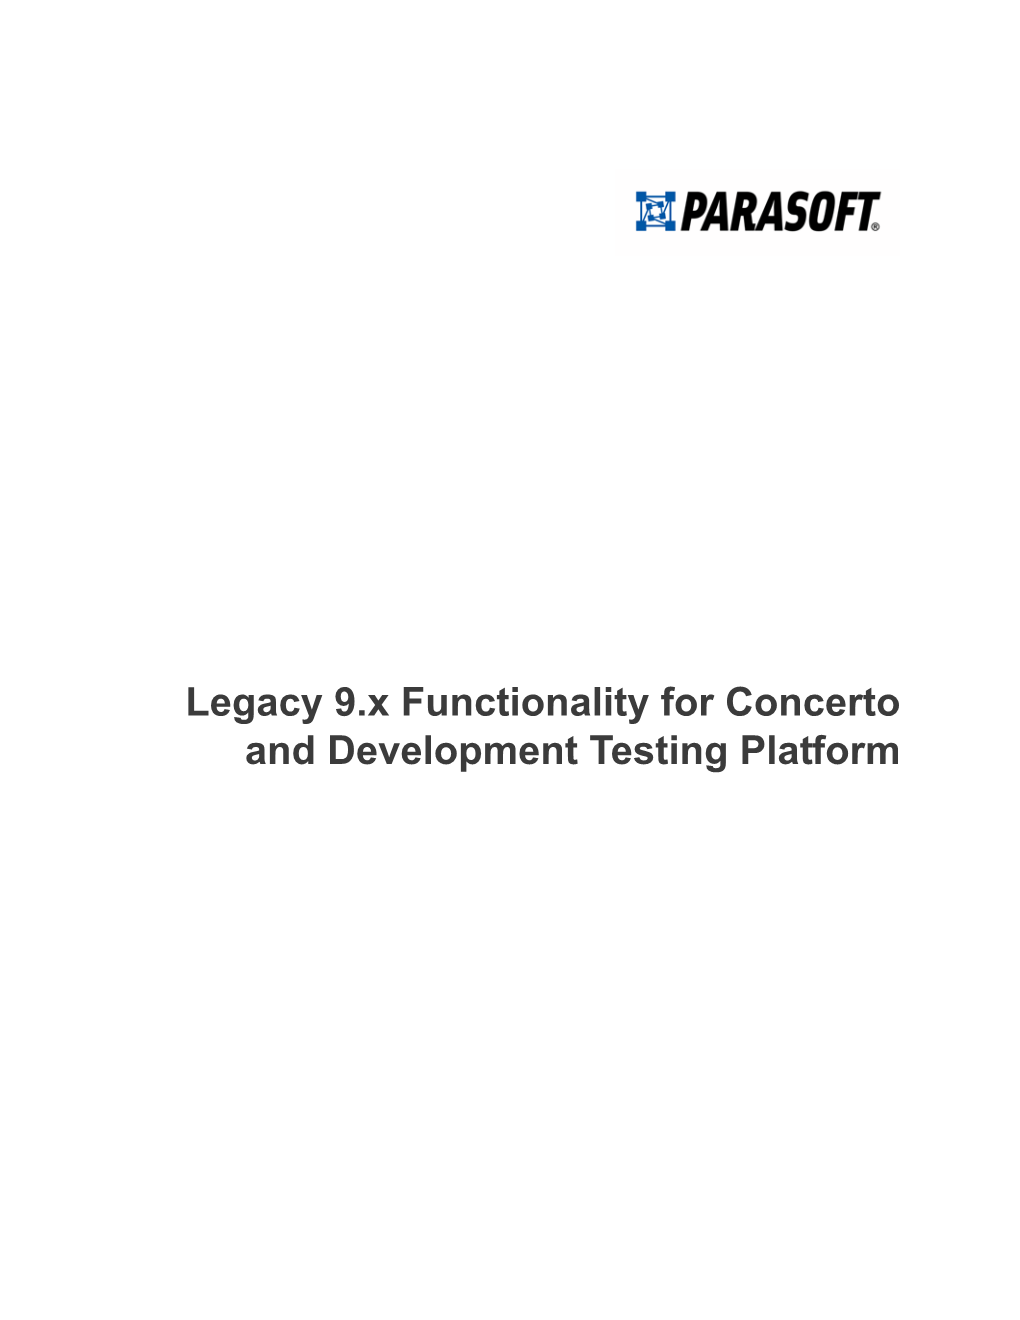 Legacy 9.X Functionality for Concerto and Development Testing Platform PARASOFT END USER LICENSE AGREEMENT